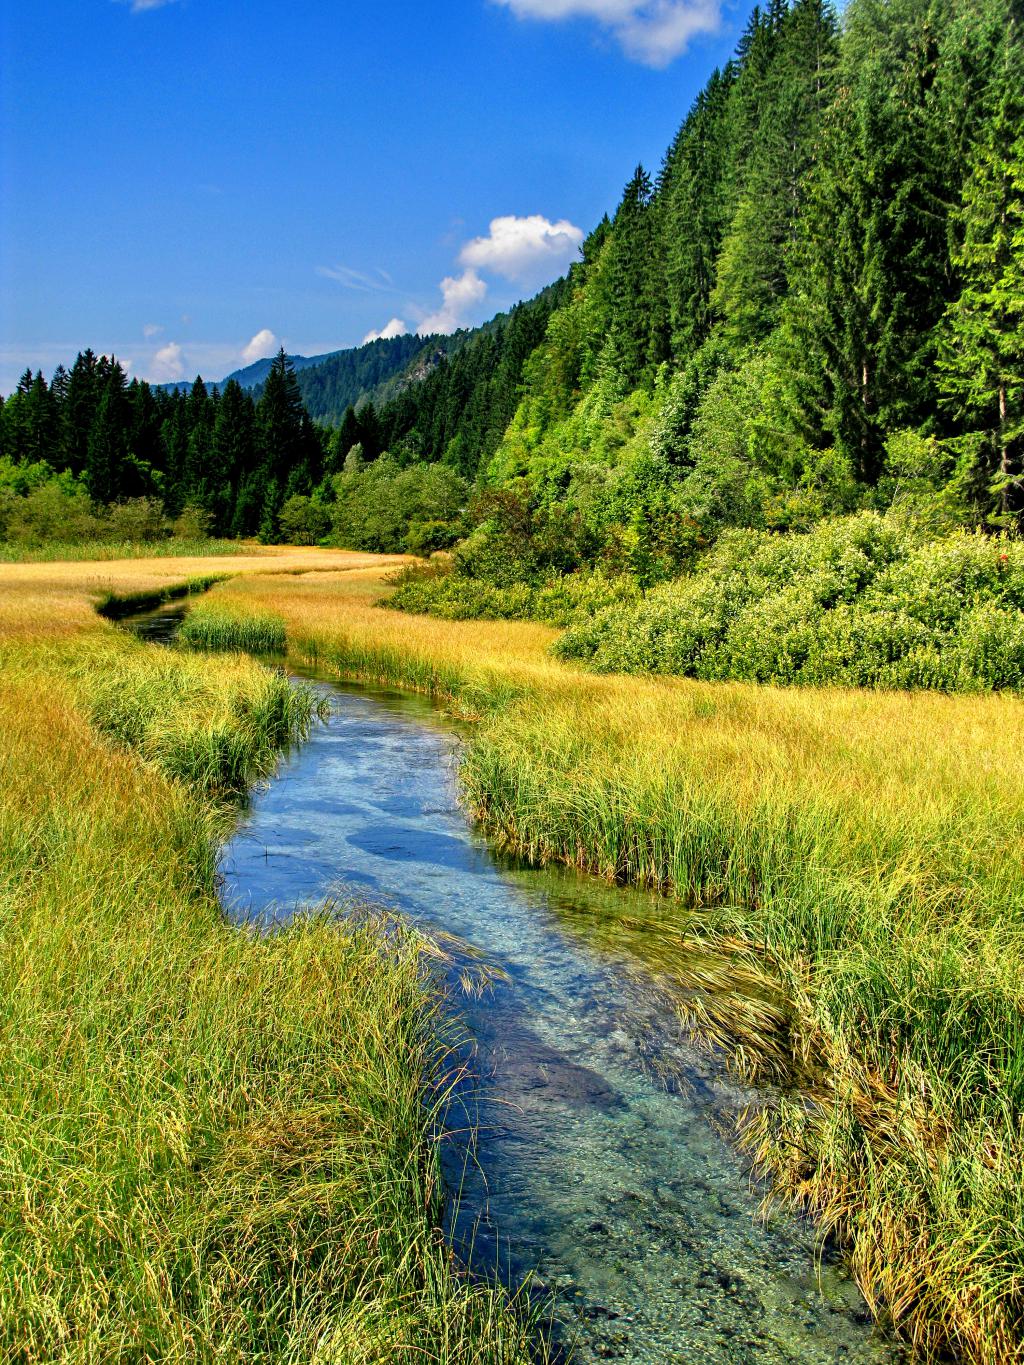 Image of the Sava River below the Planica valley in Slovenia